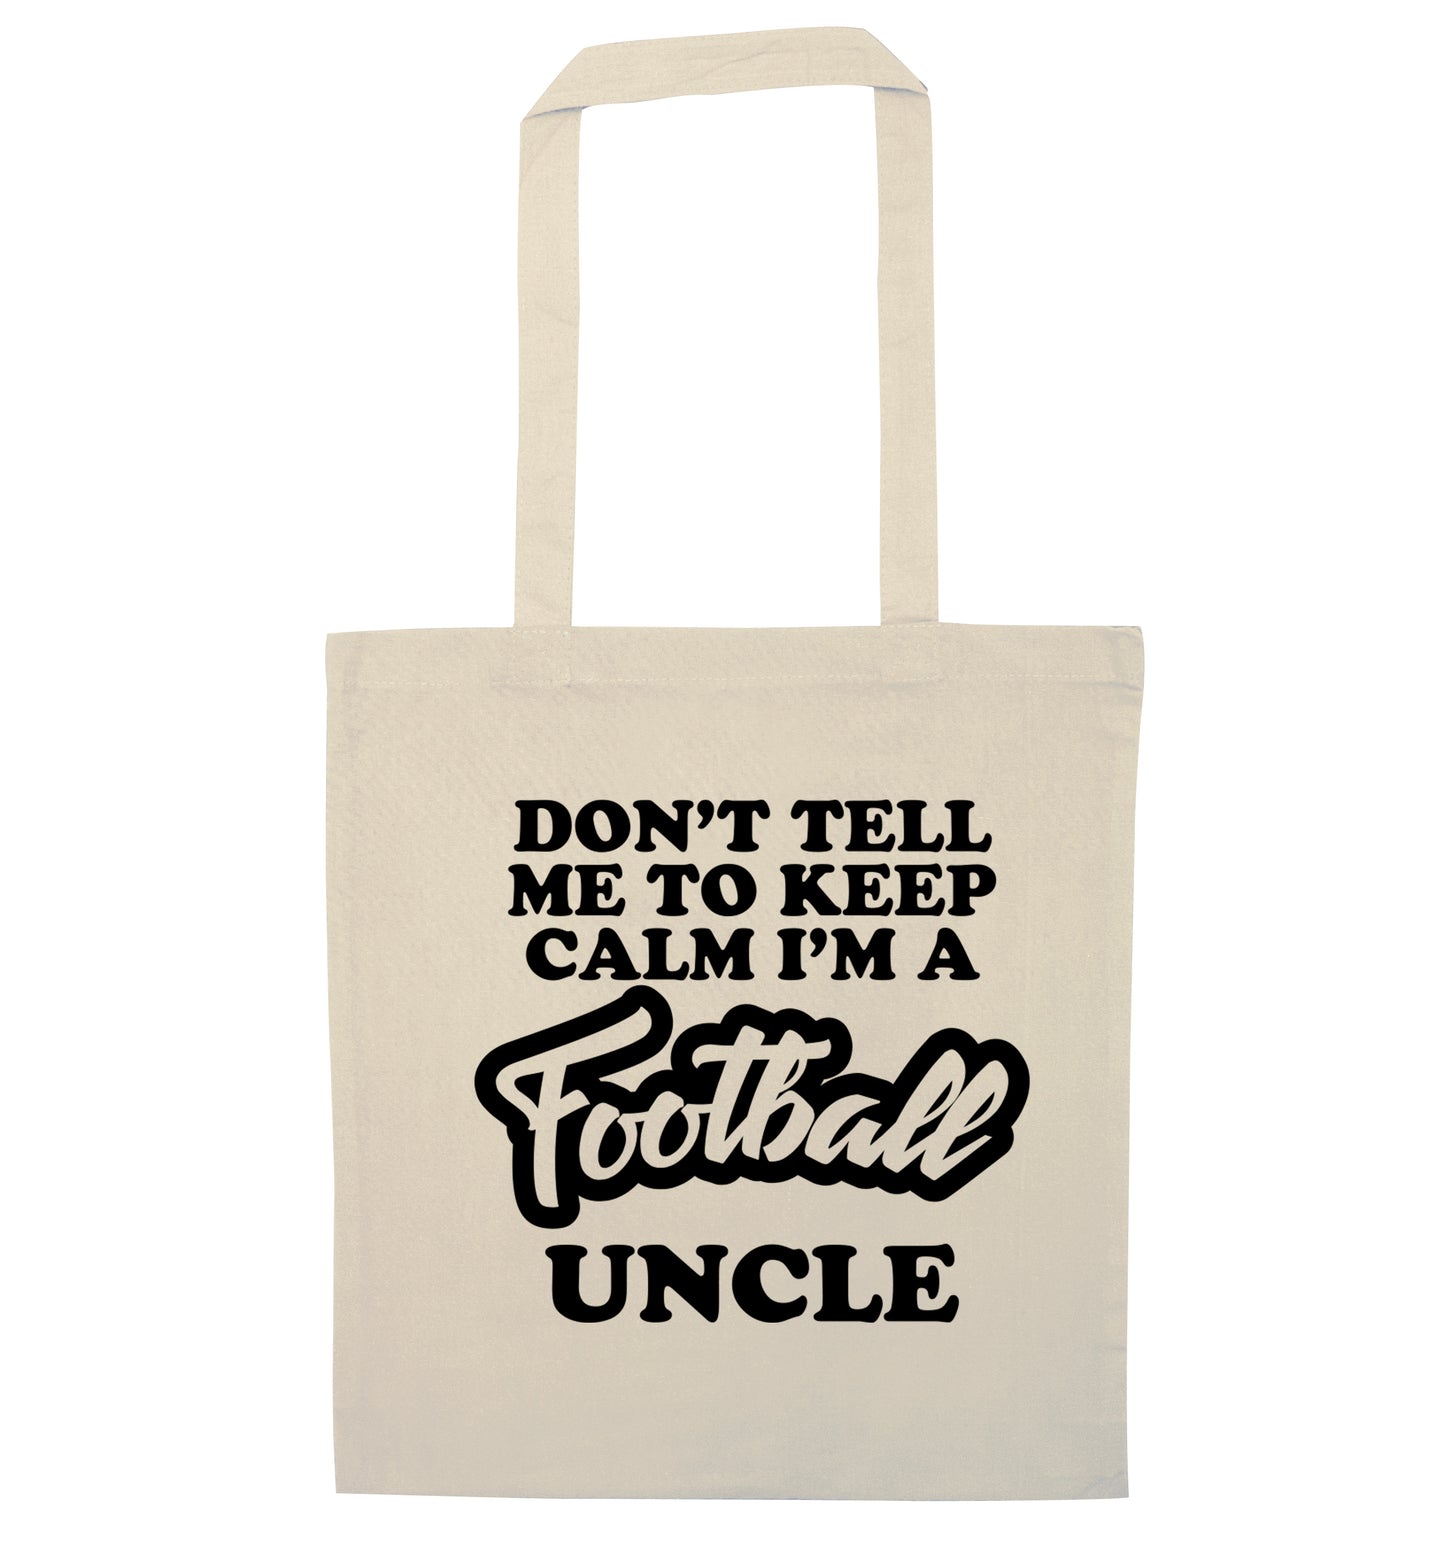 Don't tell me to keep calm I'm a football uncle natural tote bag